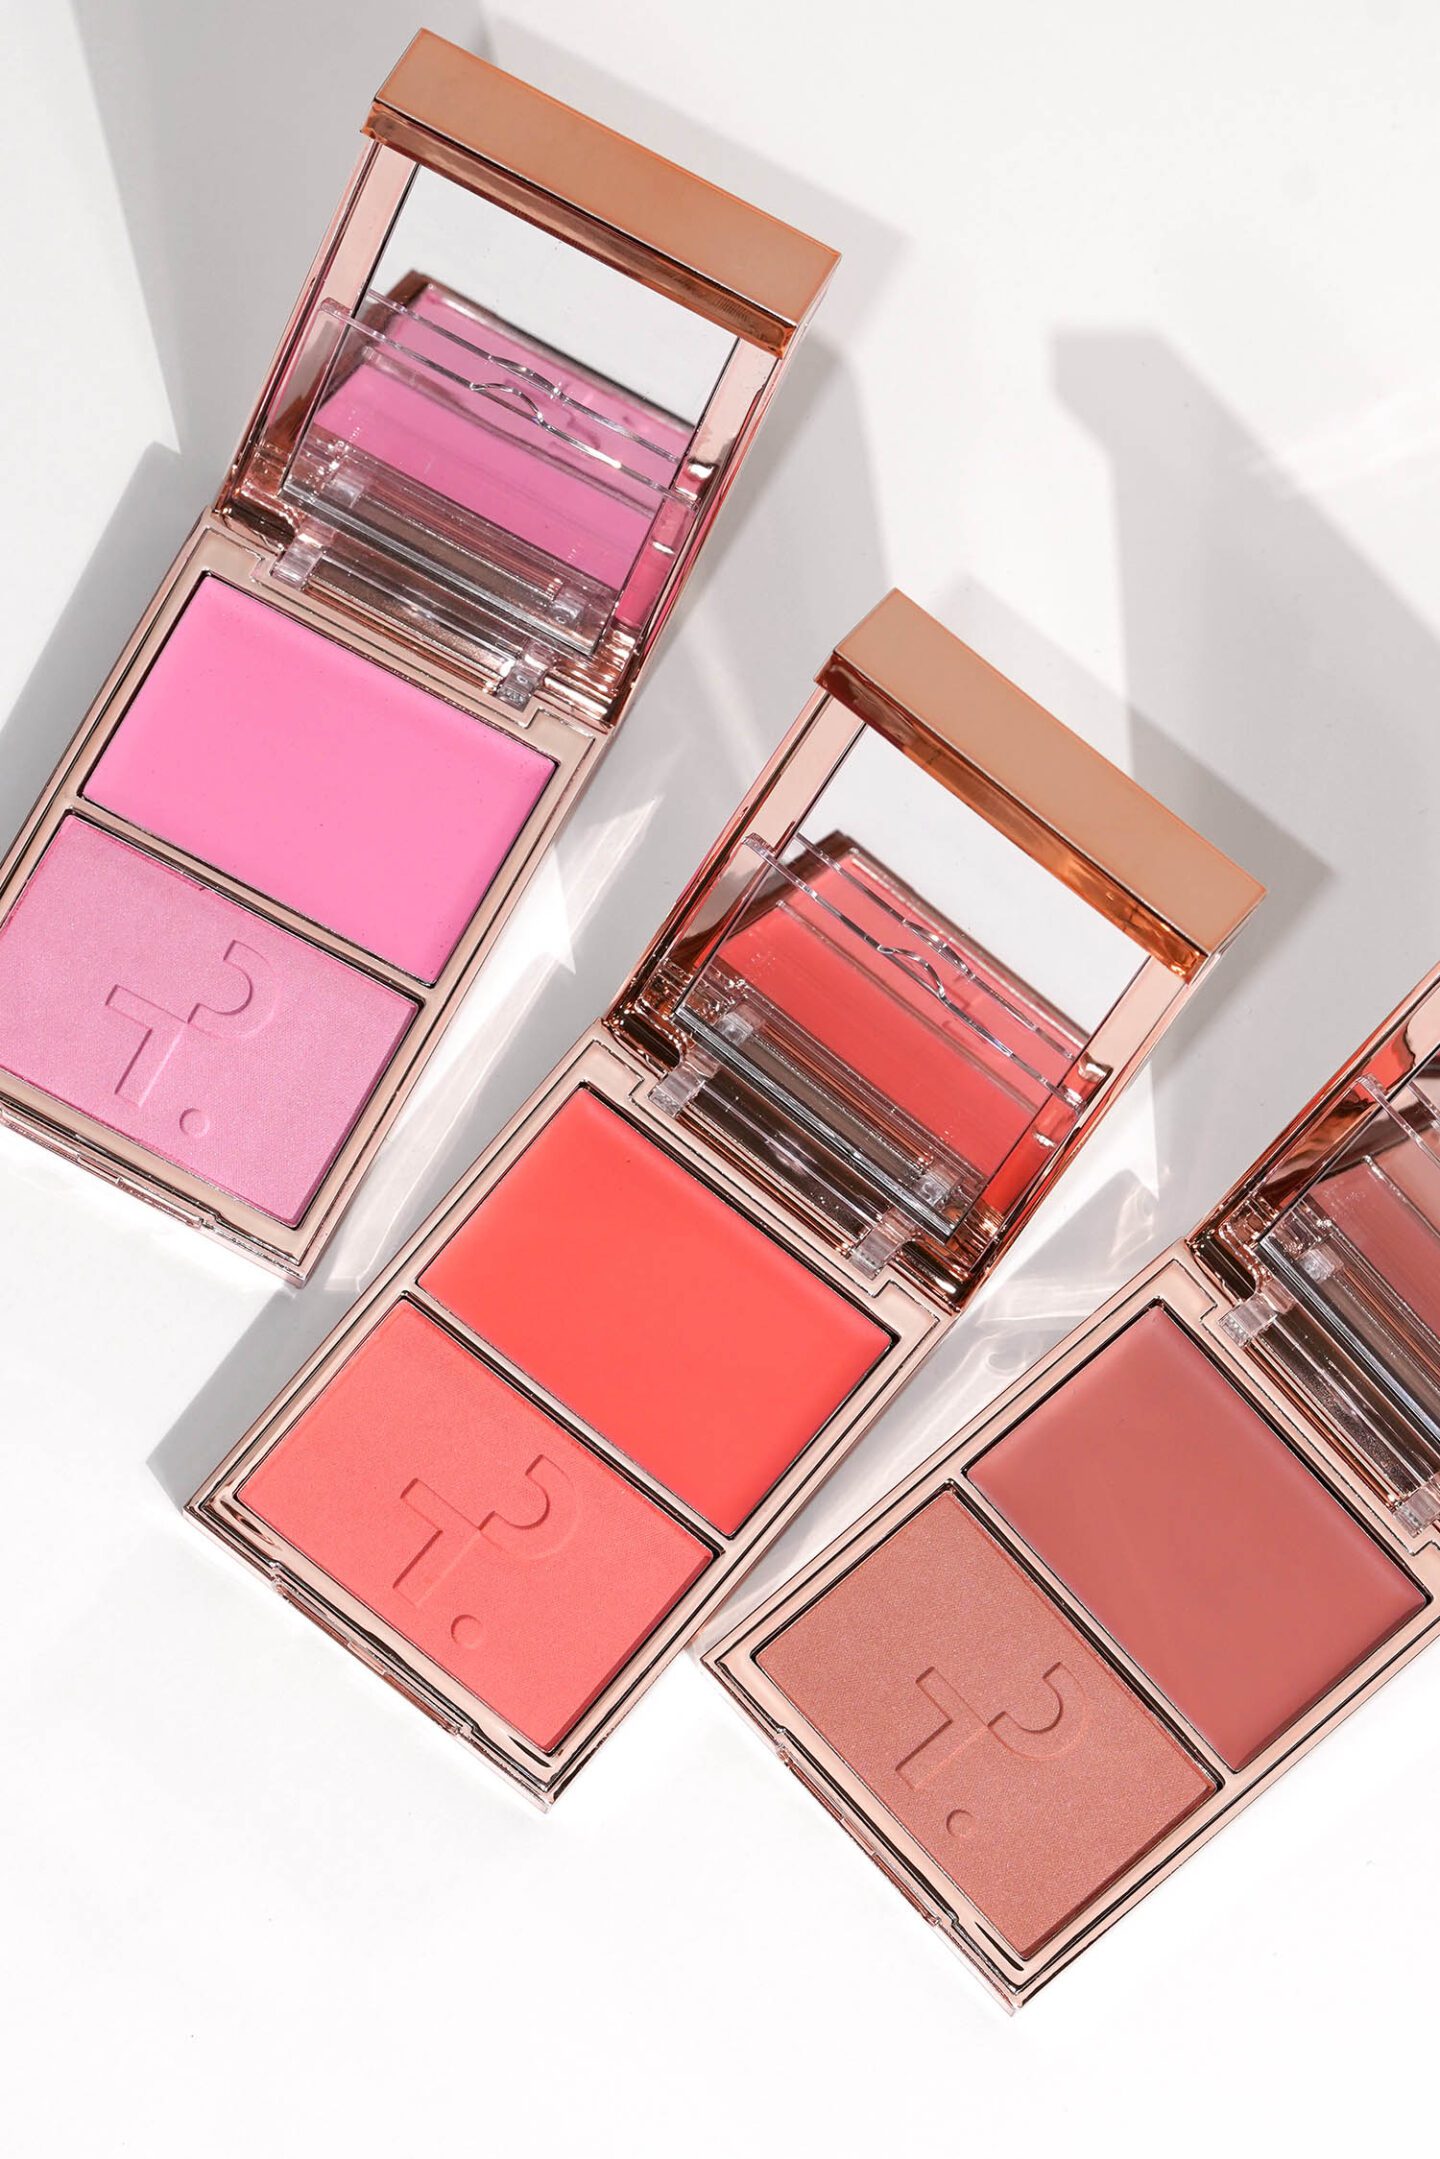 Patrick Ta Spring Double Take Creme and Powder Blush: Just Enough, She's the Moment and Not Too Much